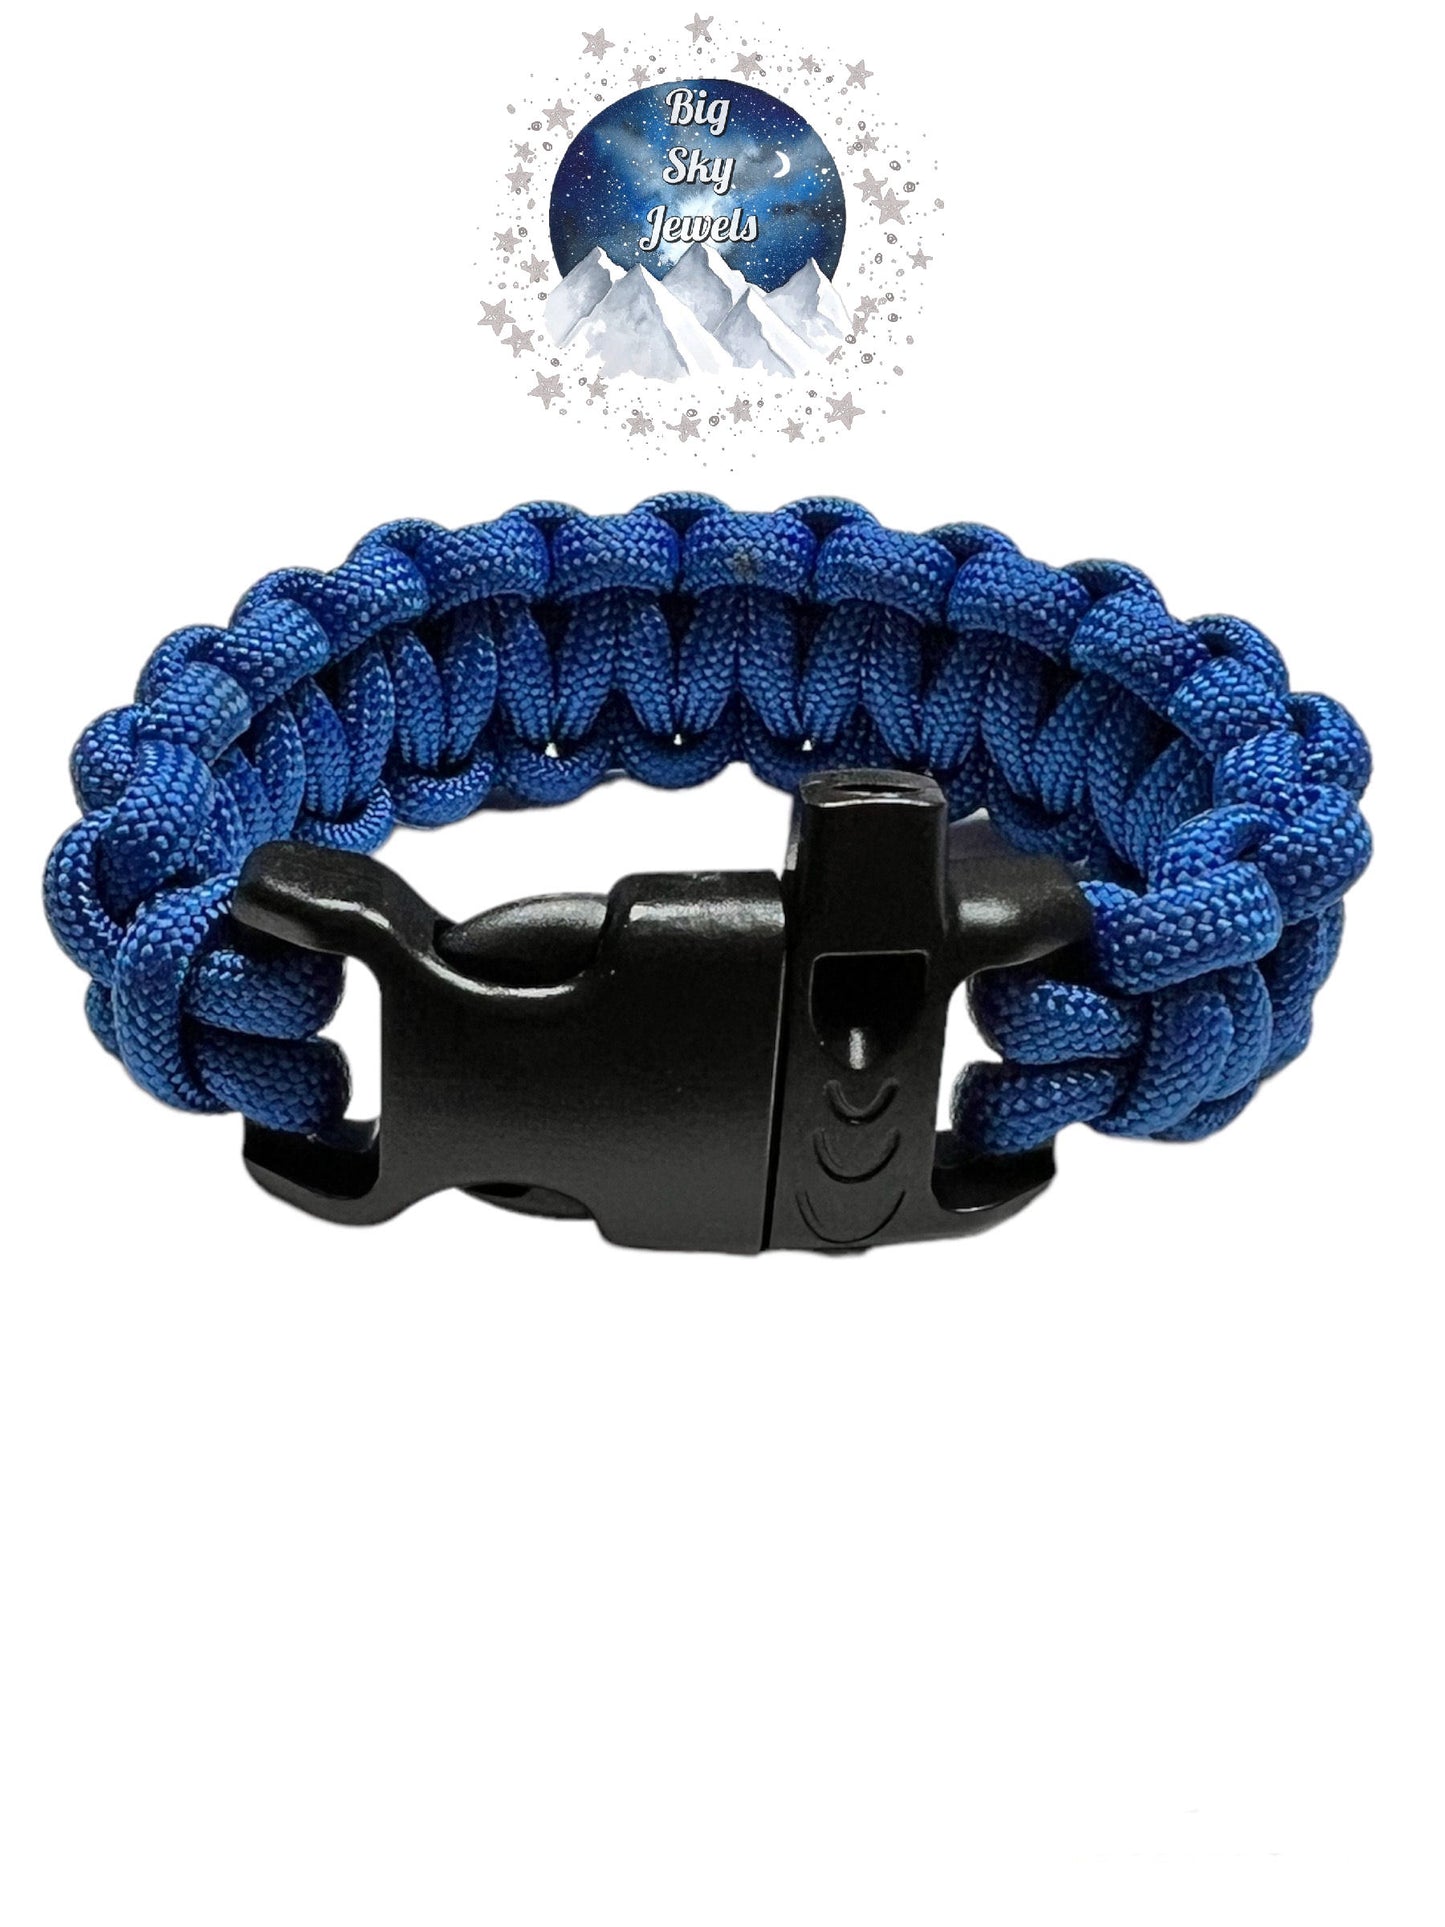 ONE 550 Paracord Whistle Bracelet Kids Adults Multiple Color Option listing Ages 3+ Hiking Camping Emergency